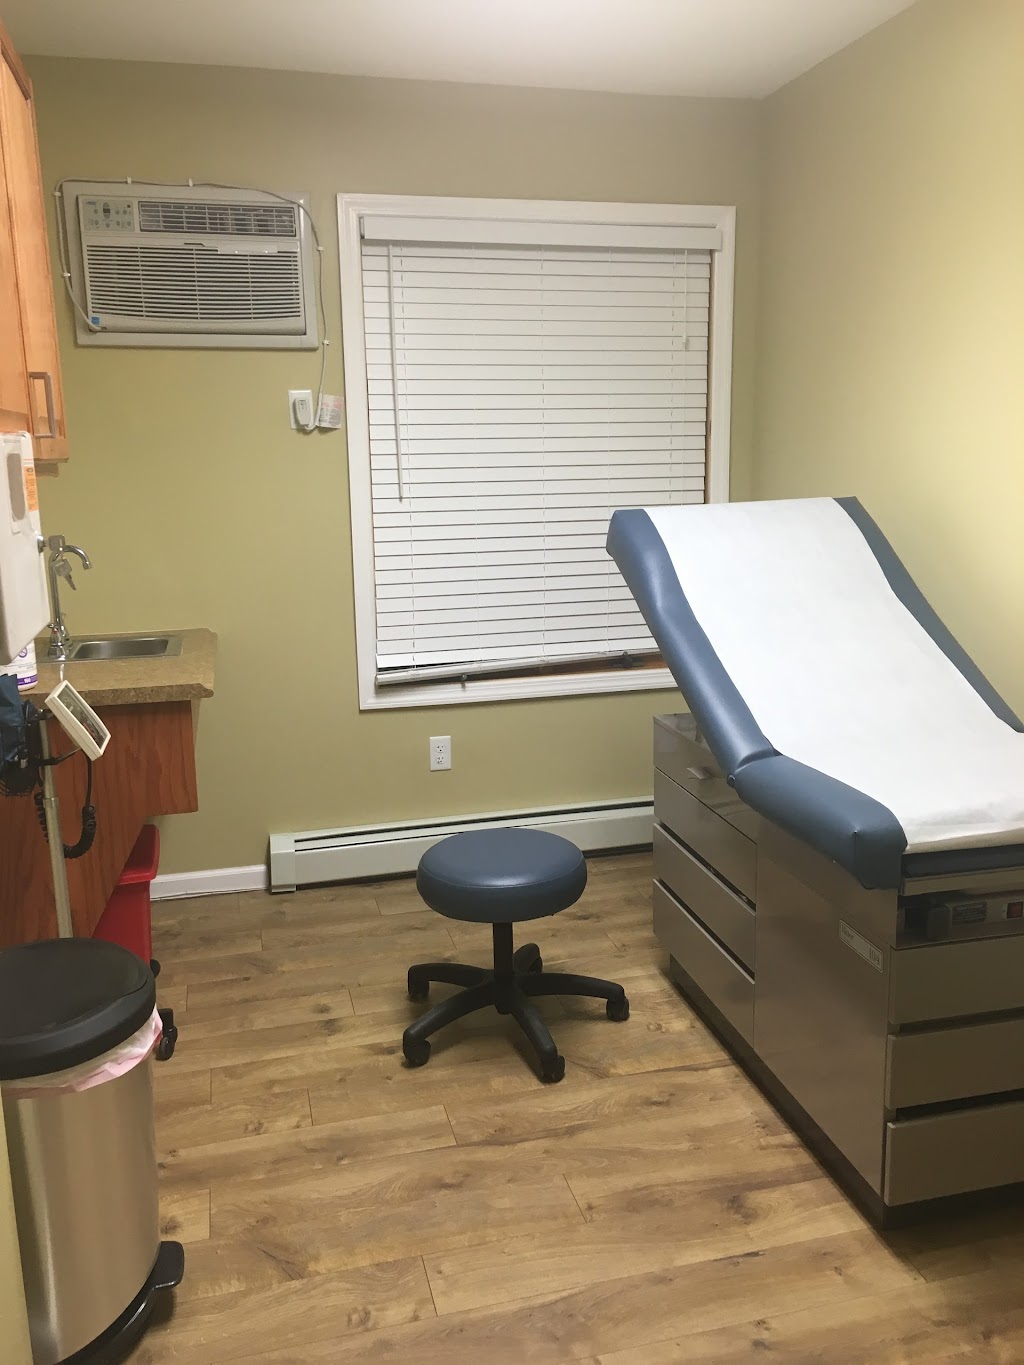 Optimal HealthCare - Dr. Casimir, DNP | 282 N Middletown Rd, Pearl River, NY 10965 | Phone: (845) 920-1520